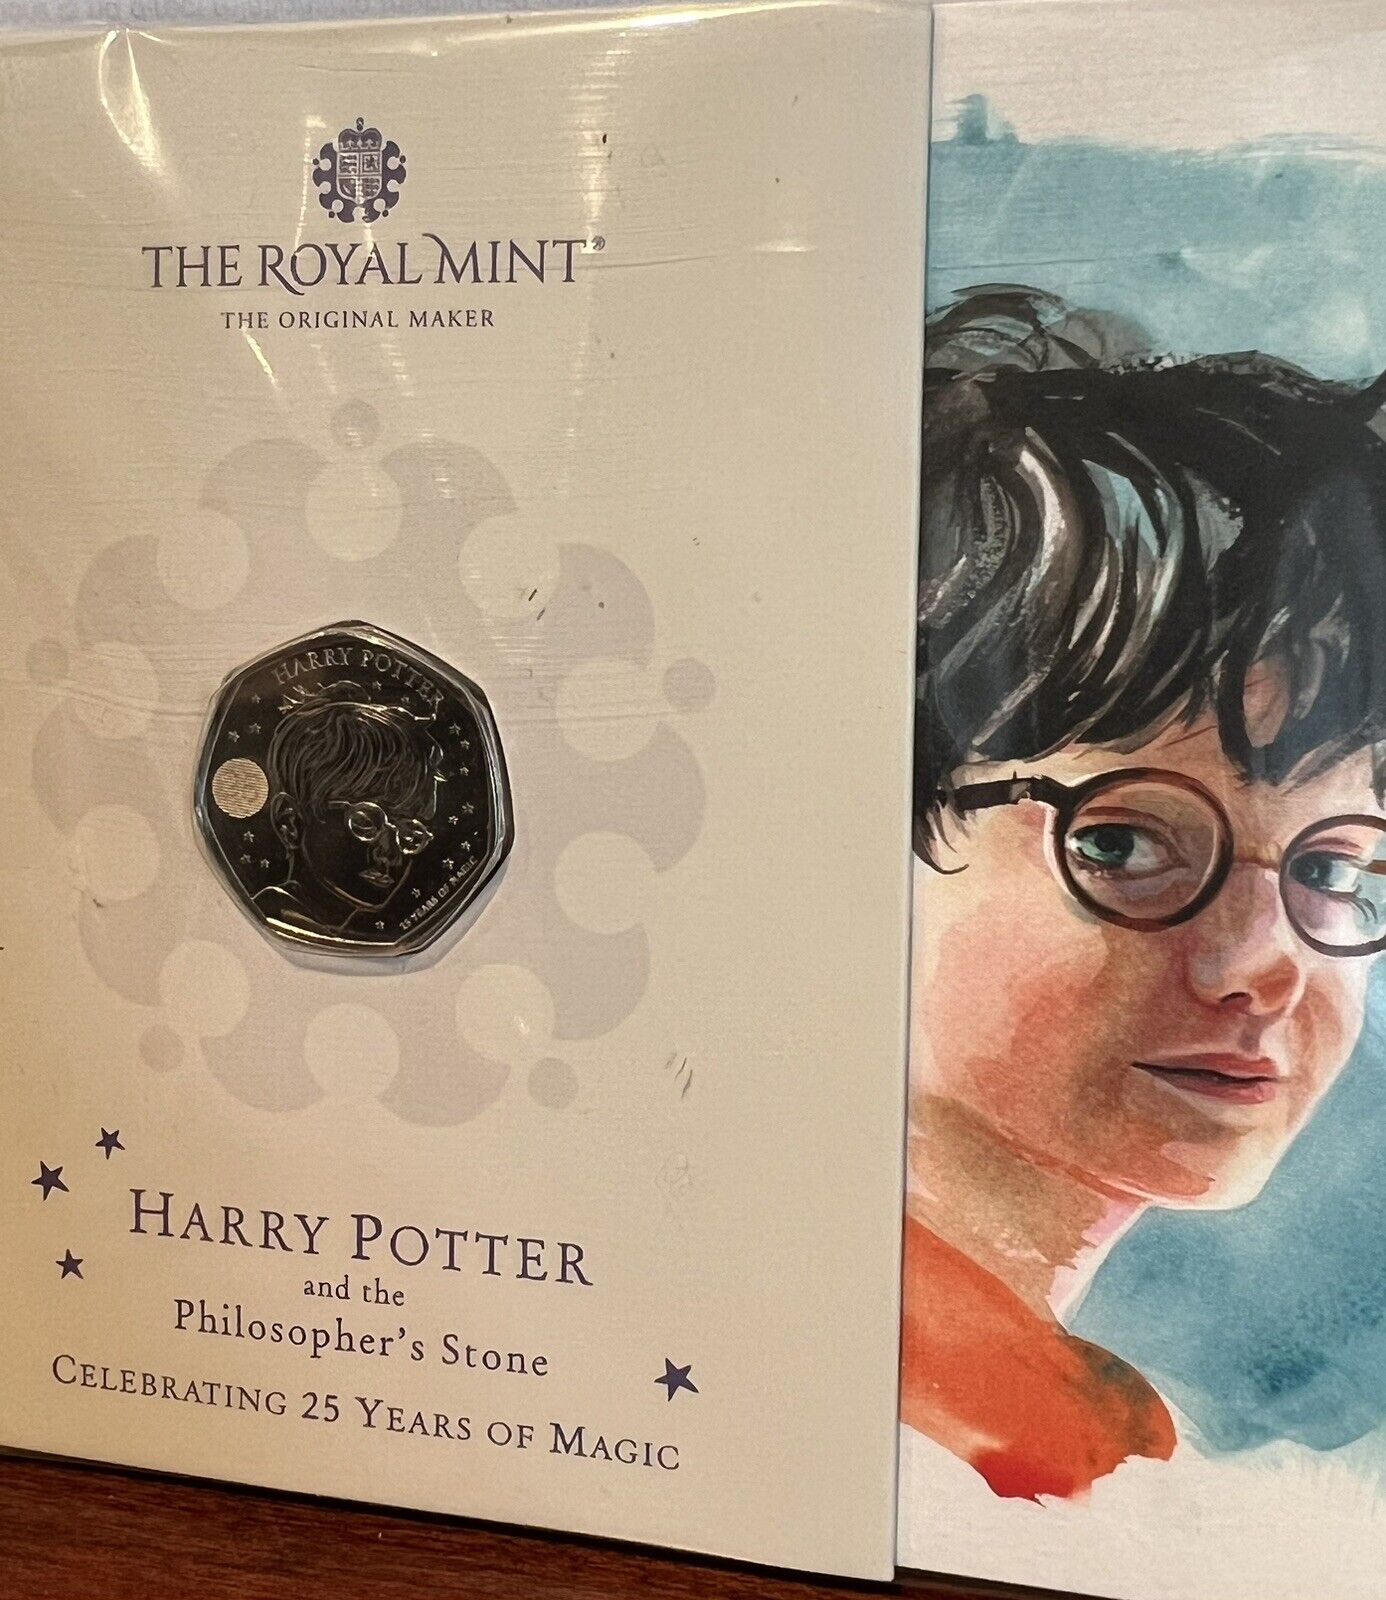 2022 UK Harry Potter Coin BU - 25 Yrs of Magic Commemorative 50p Coin #1 of 4